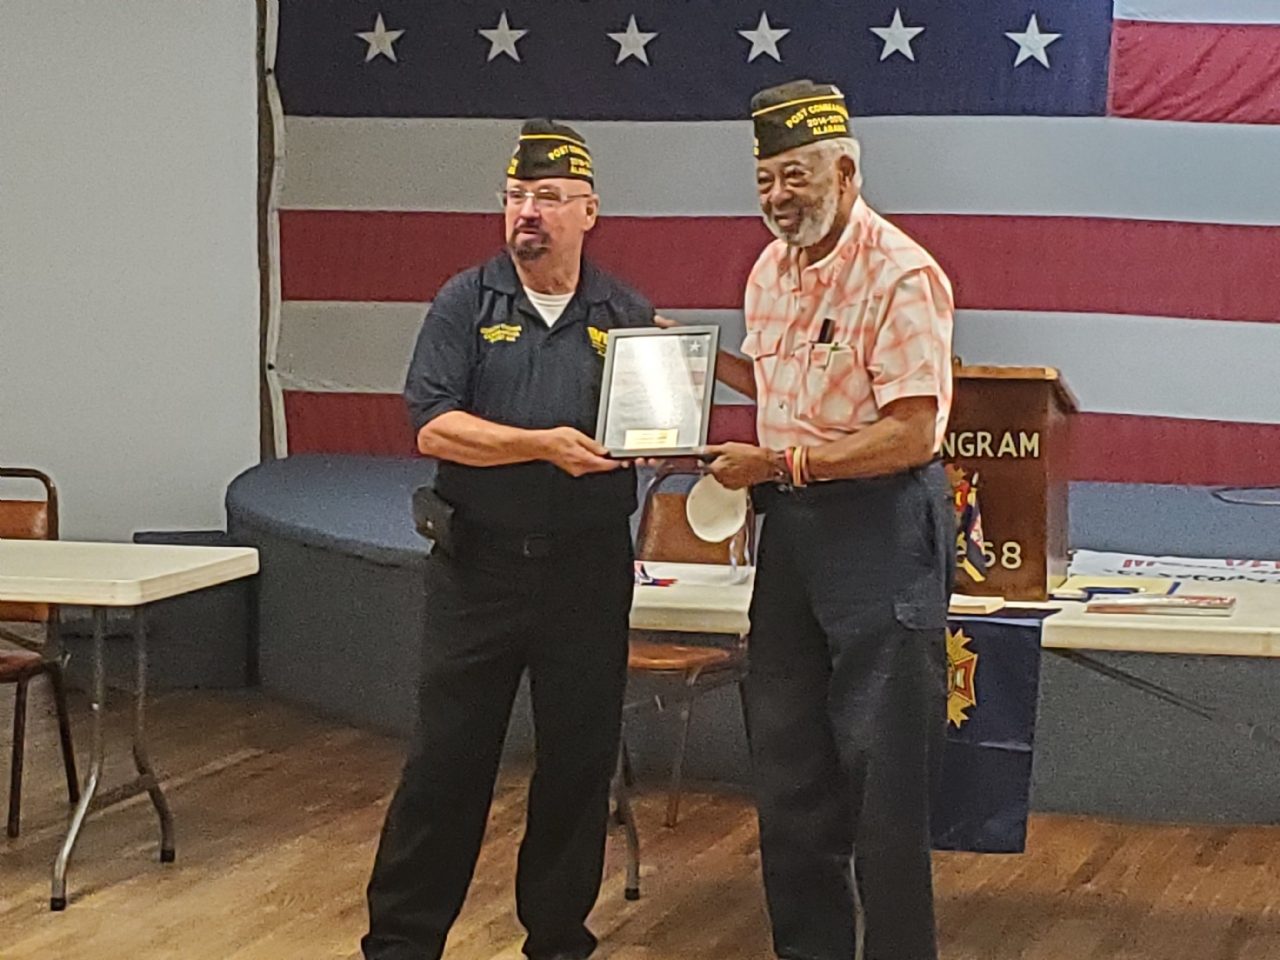 VFW Post 668 celebrates its first African American Post Commander, Henry Brown, Jr.  Past Commander Brown is a veteran of the Vietnam War.